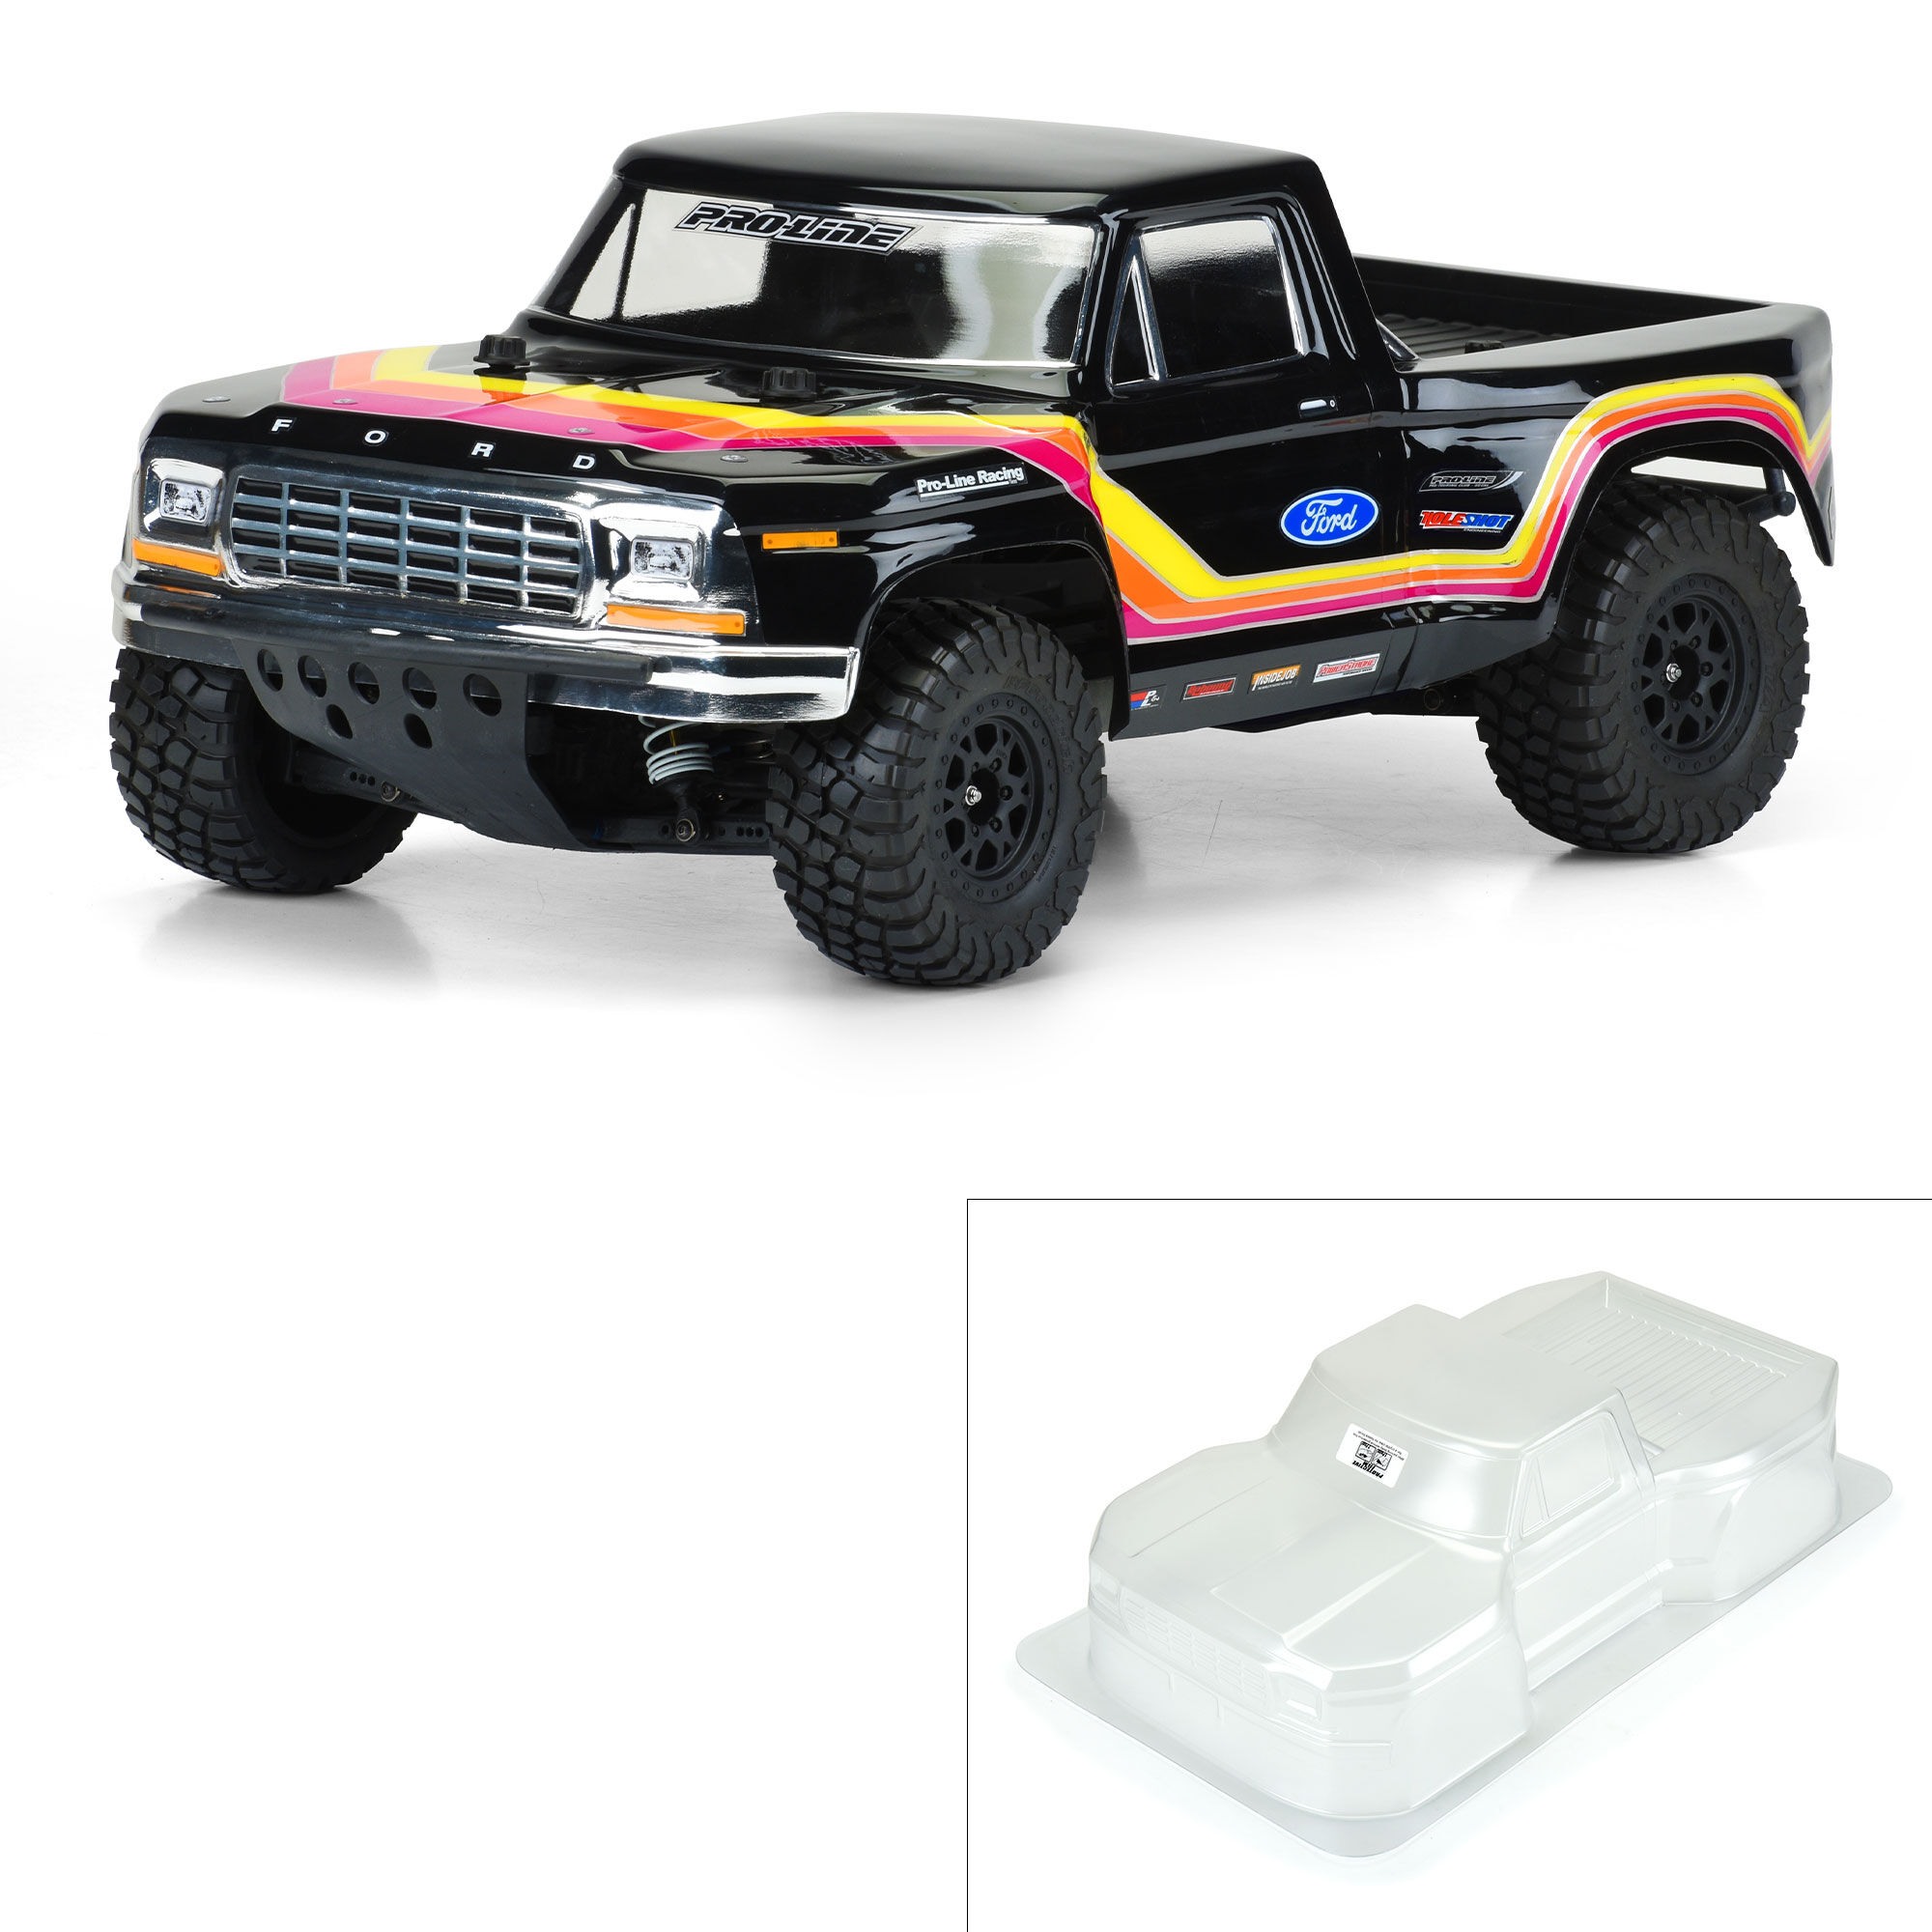 Pro-Line Racing 1/10 1979 Ford F-150 Race Truck Clear Body: Short